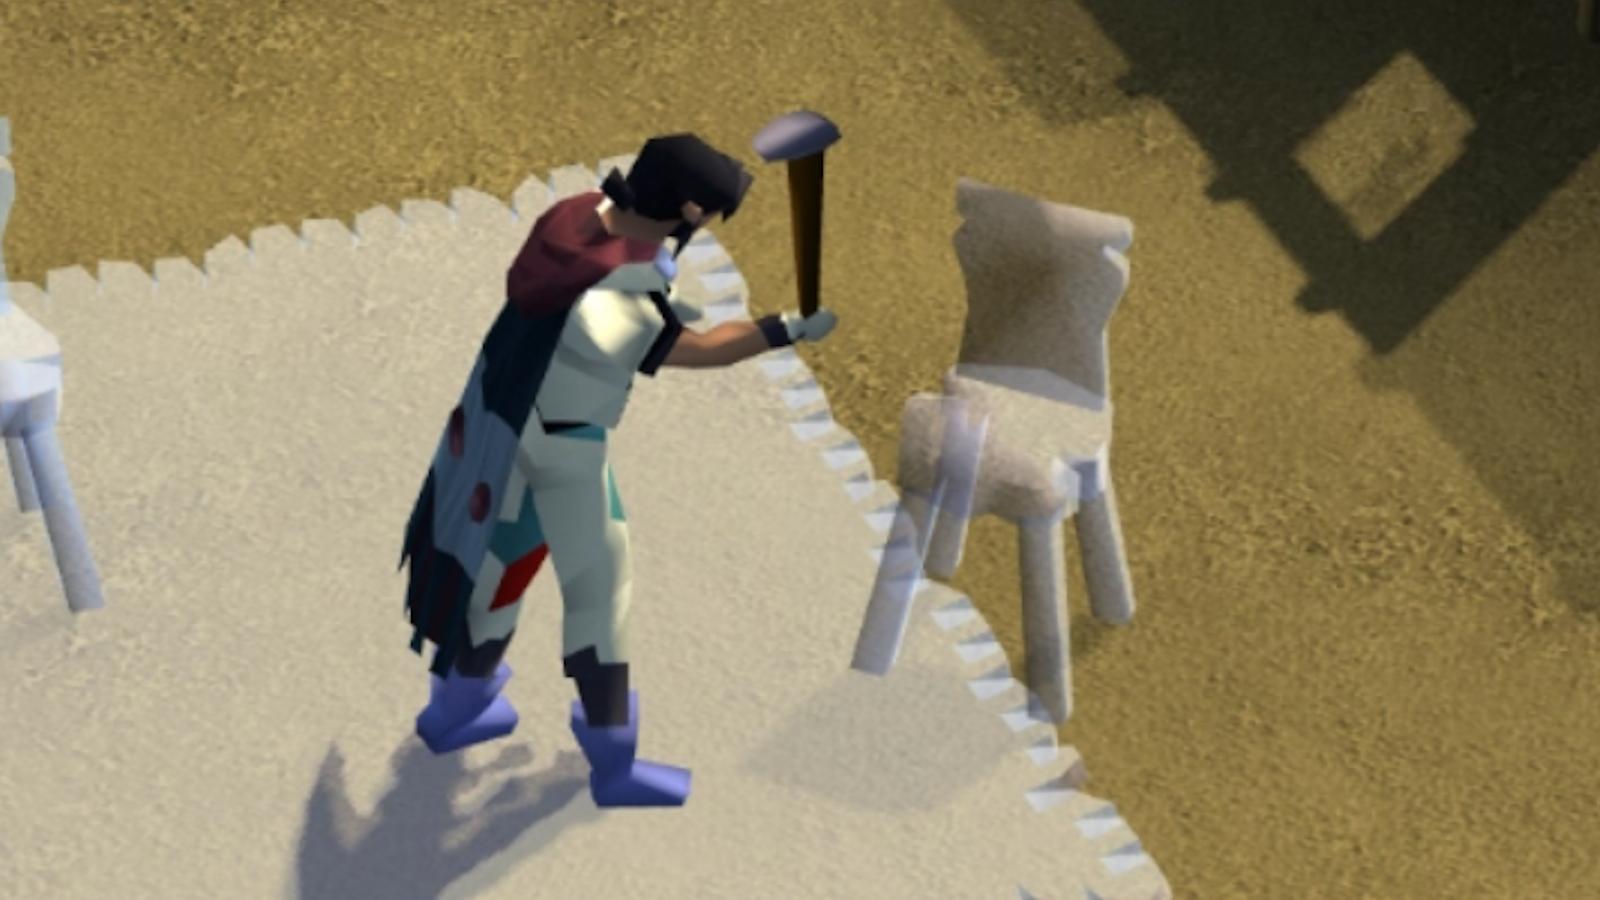 OSRS player training construction in house.